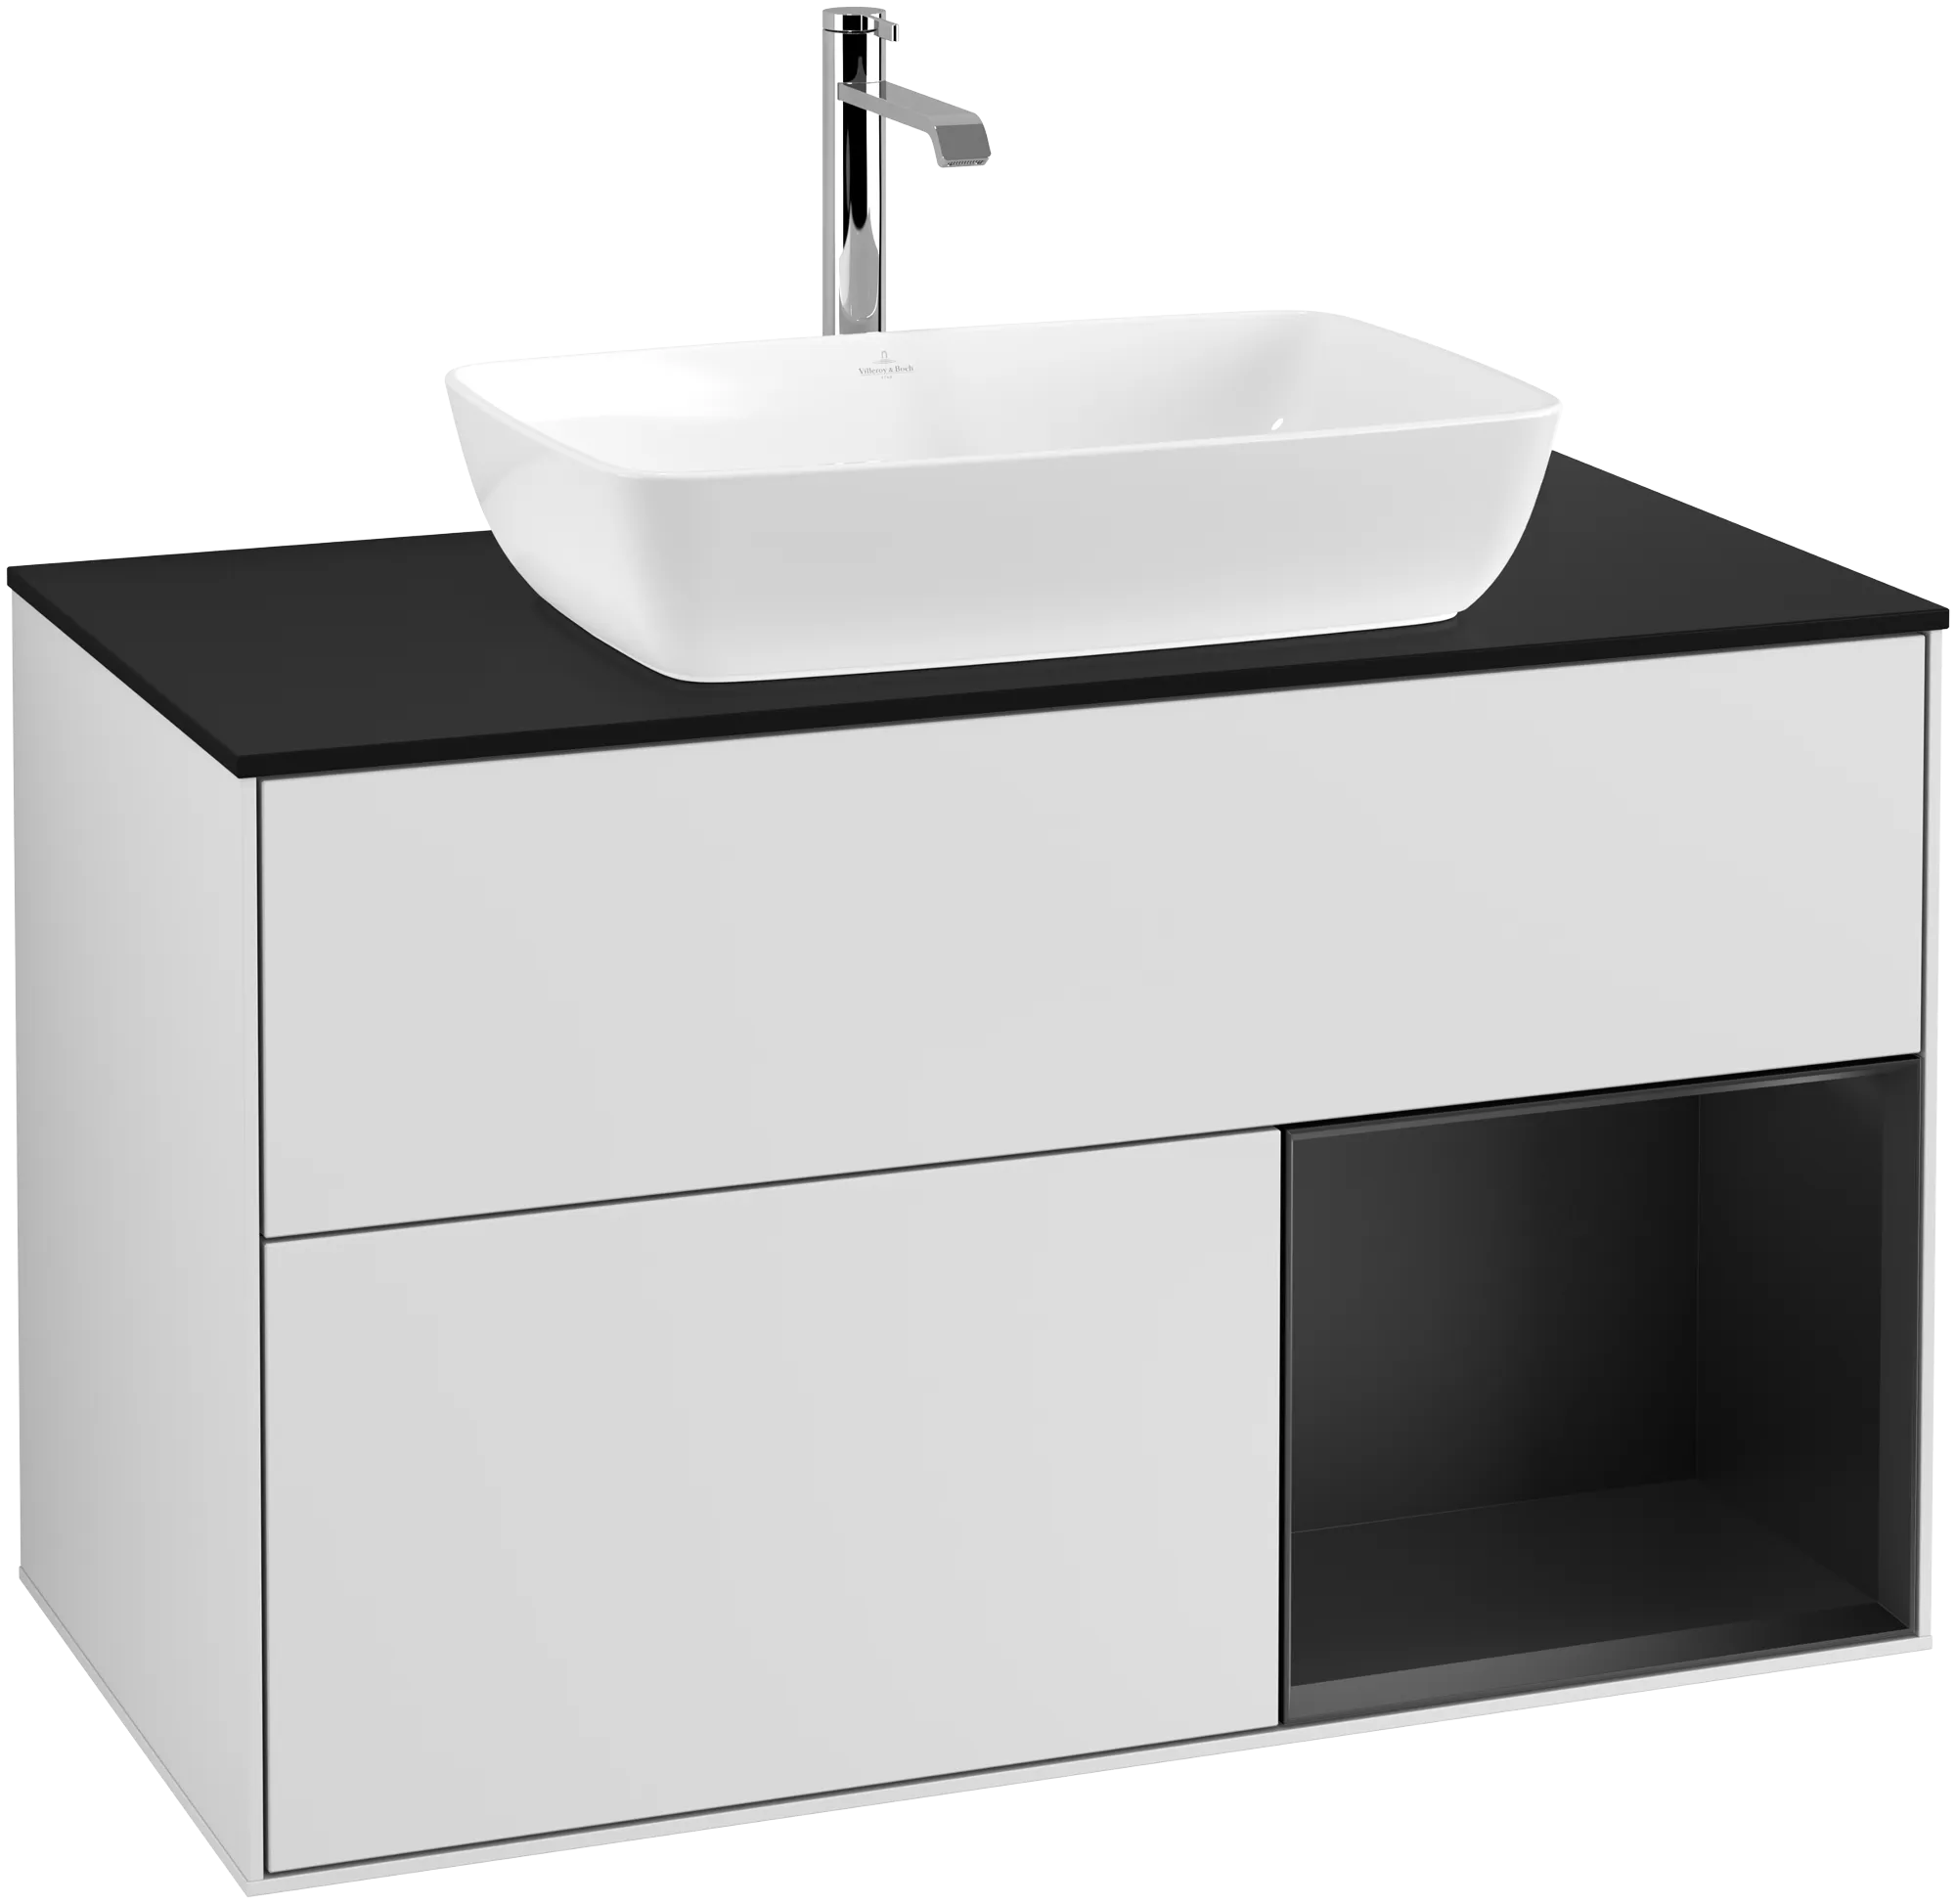 Picture of VILLEROY BOCH Finion Vanity unit, with lighting, 2 pull-out compartments, 1000 x 603 x 501 mm, White Matt Lacquer / Black Matt Lacquer / Glass Black Matt #G782PDMT